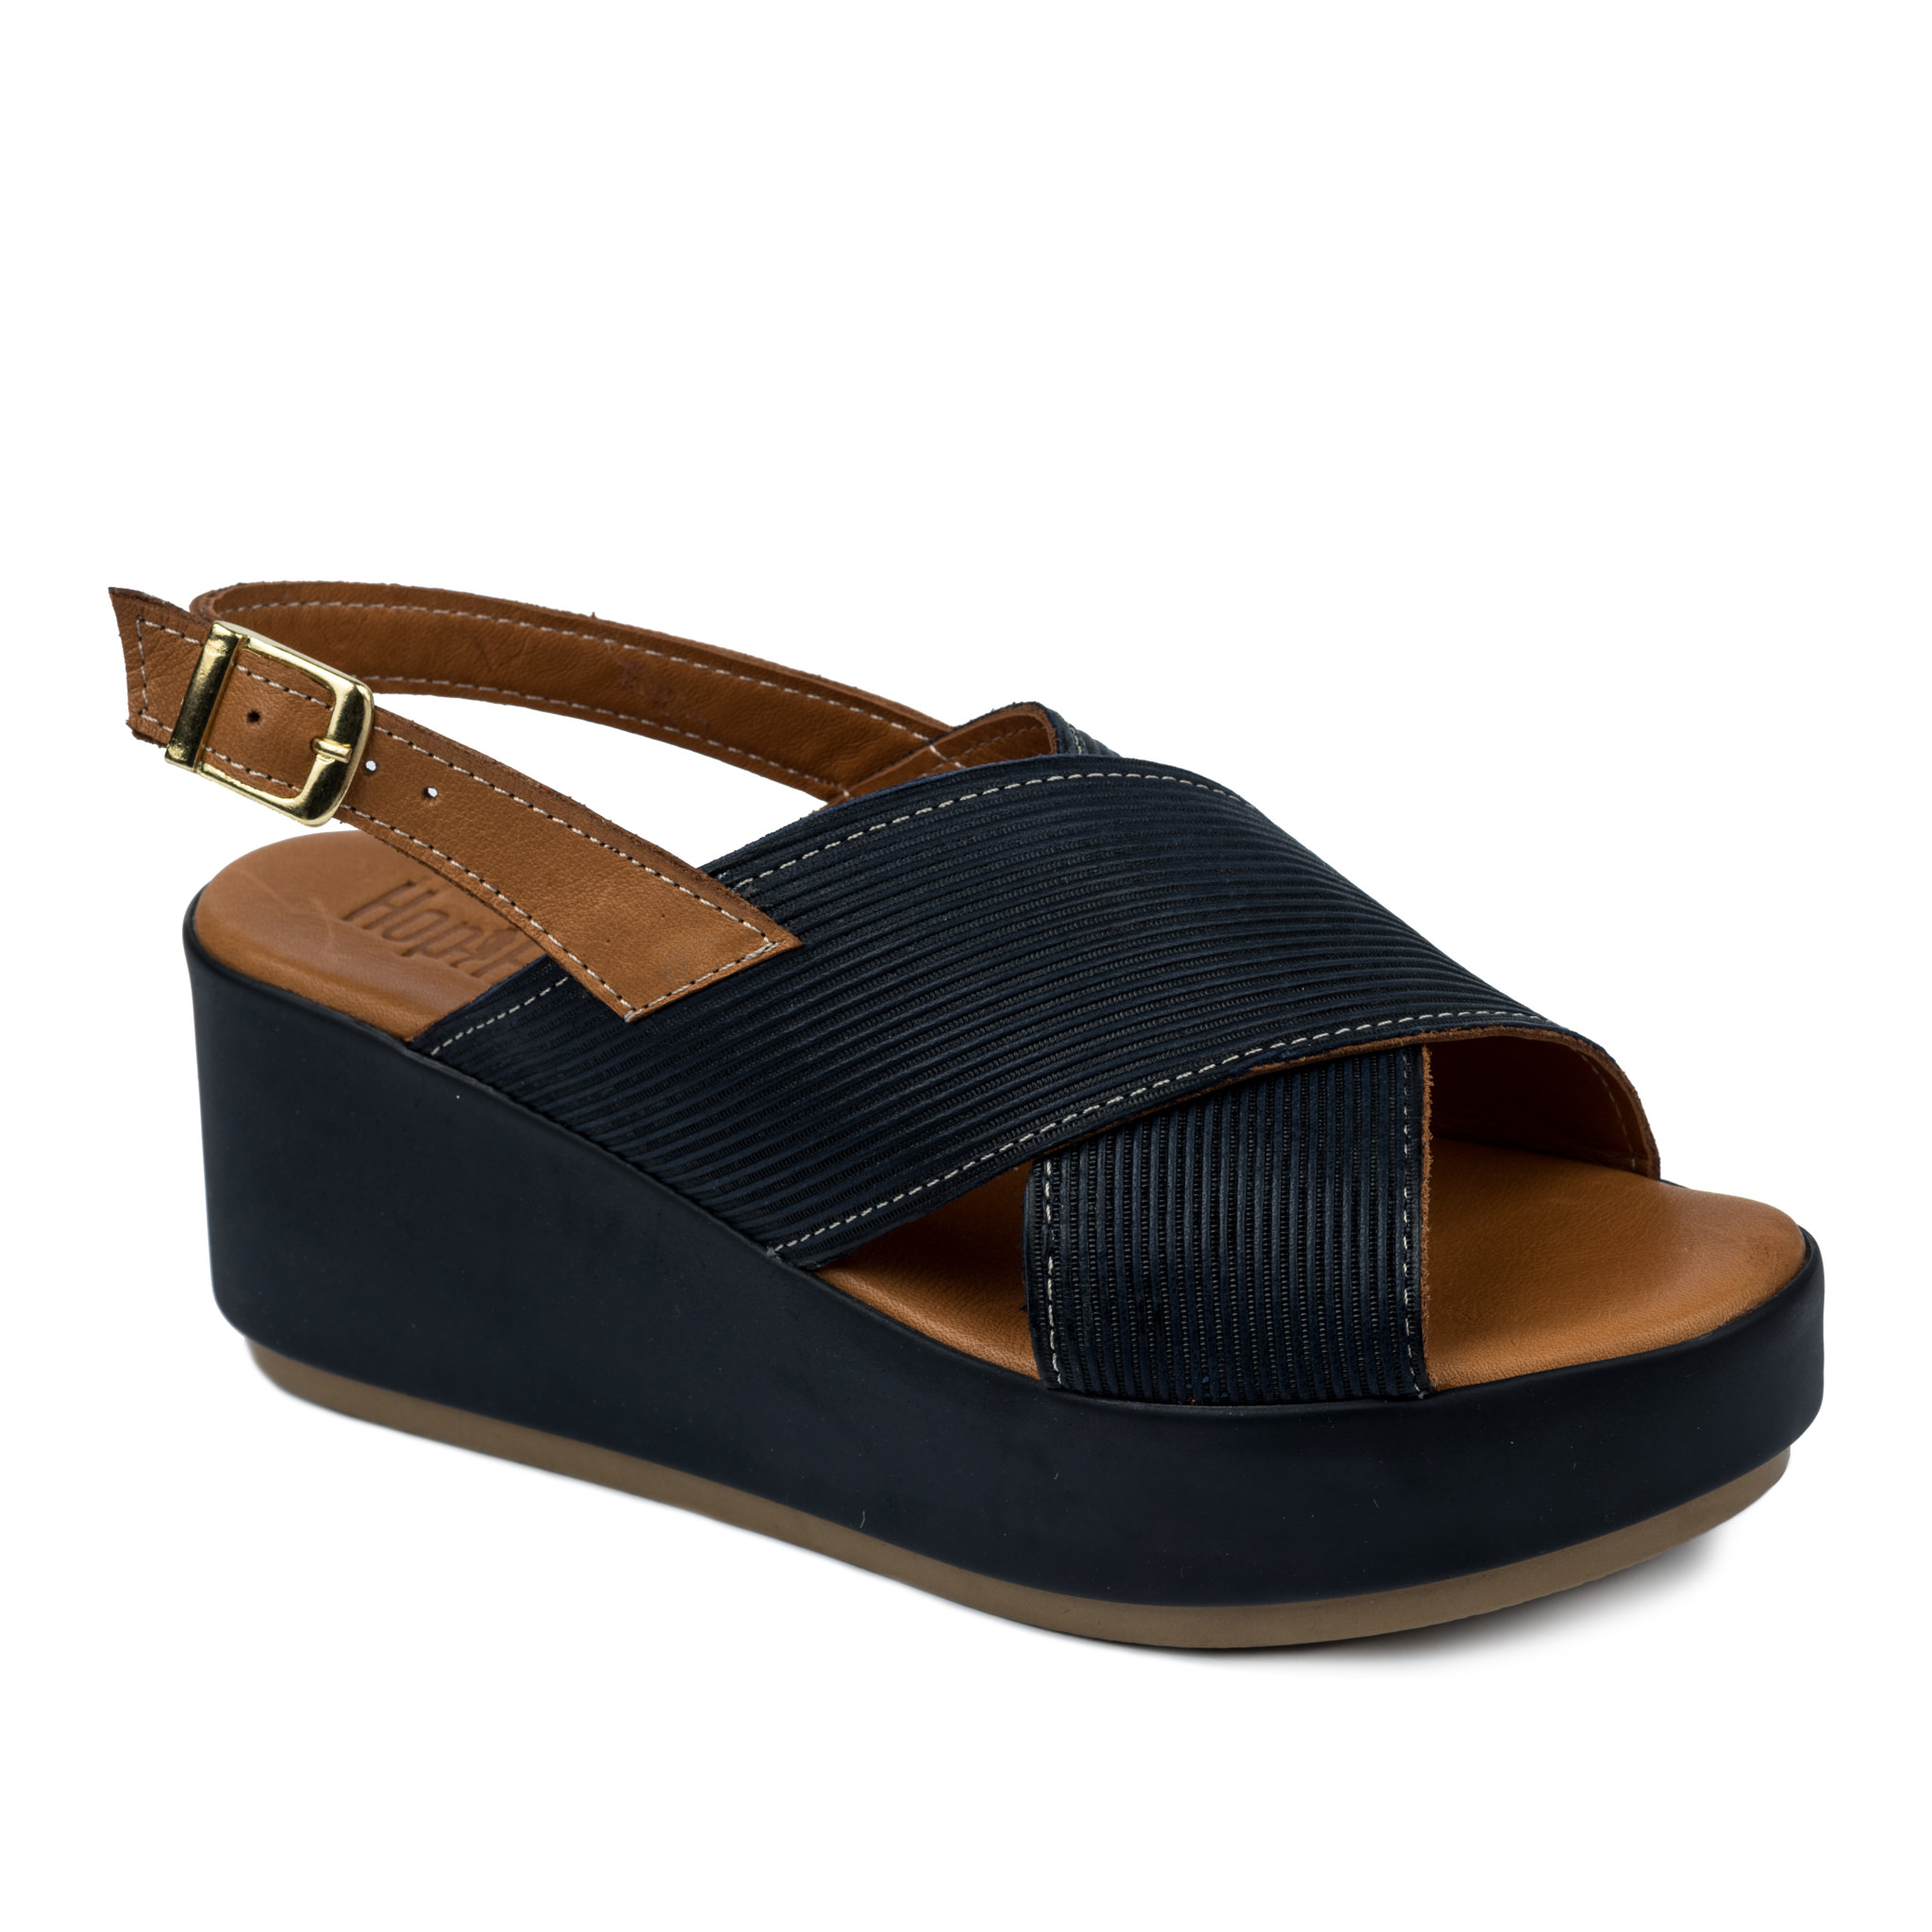 Leather sandals A603 - NAVY